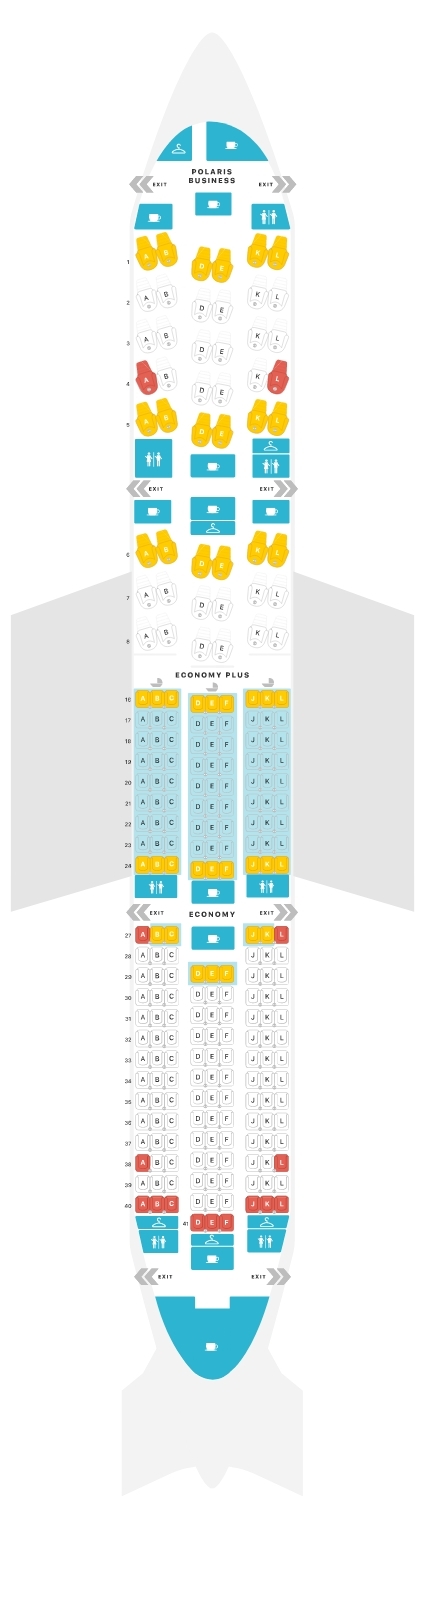 united-787-9-seating-map